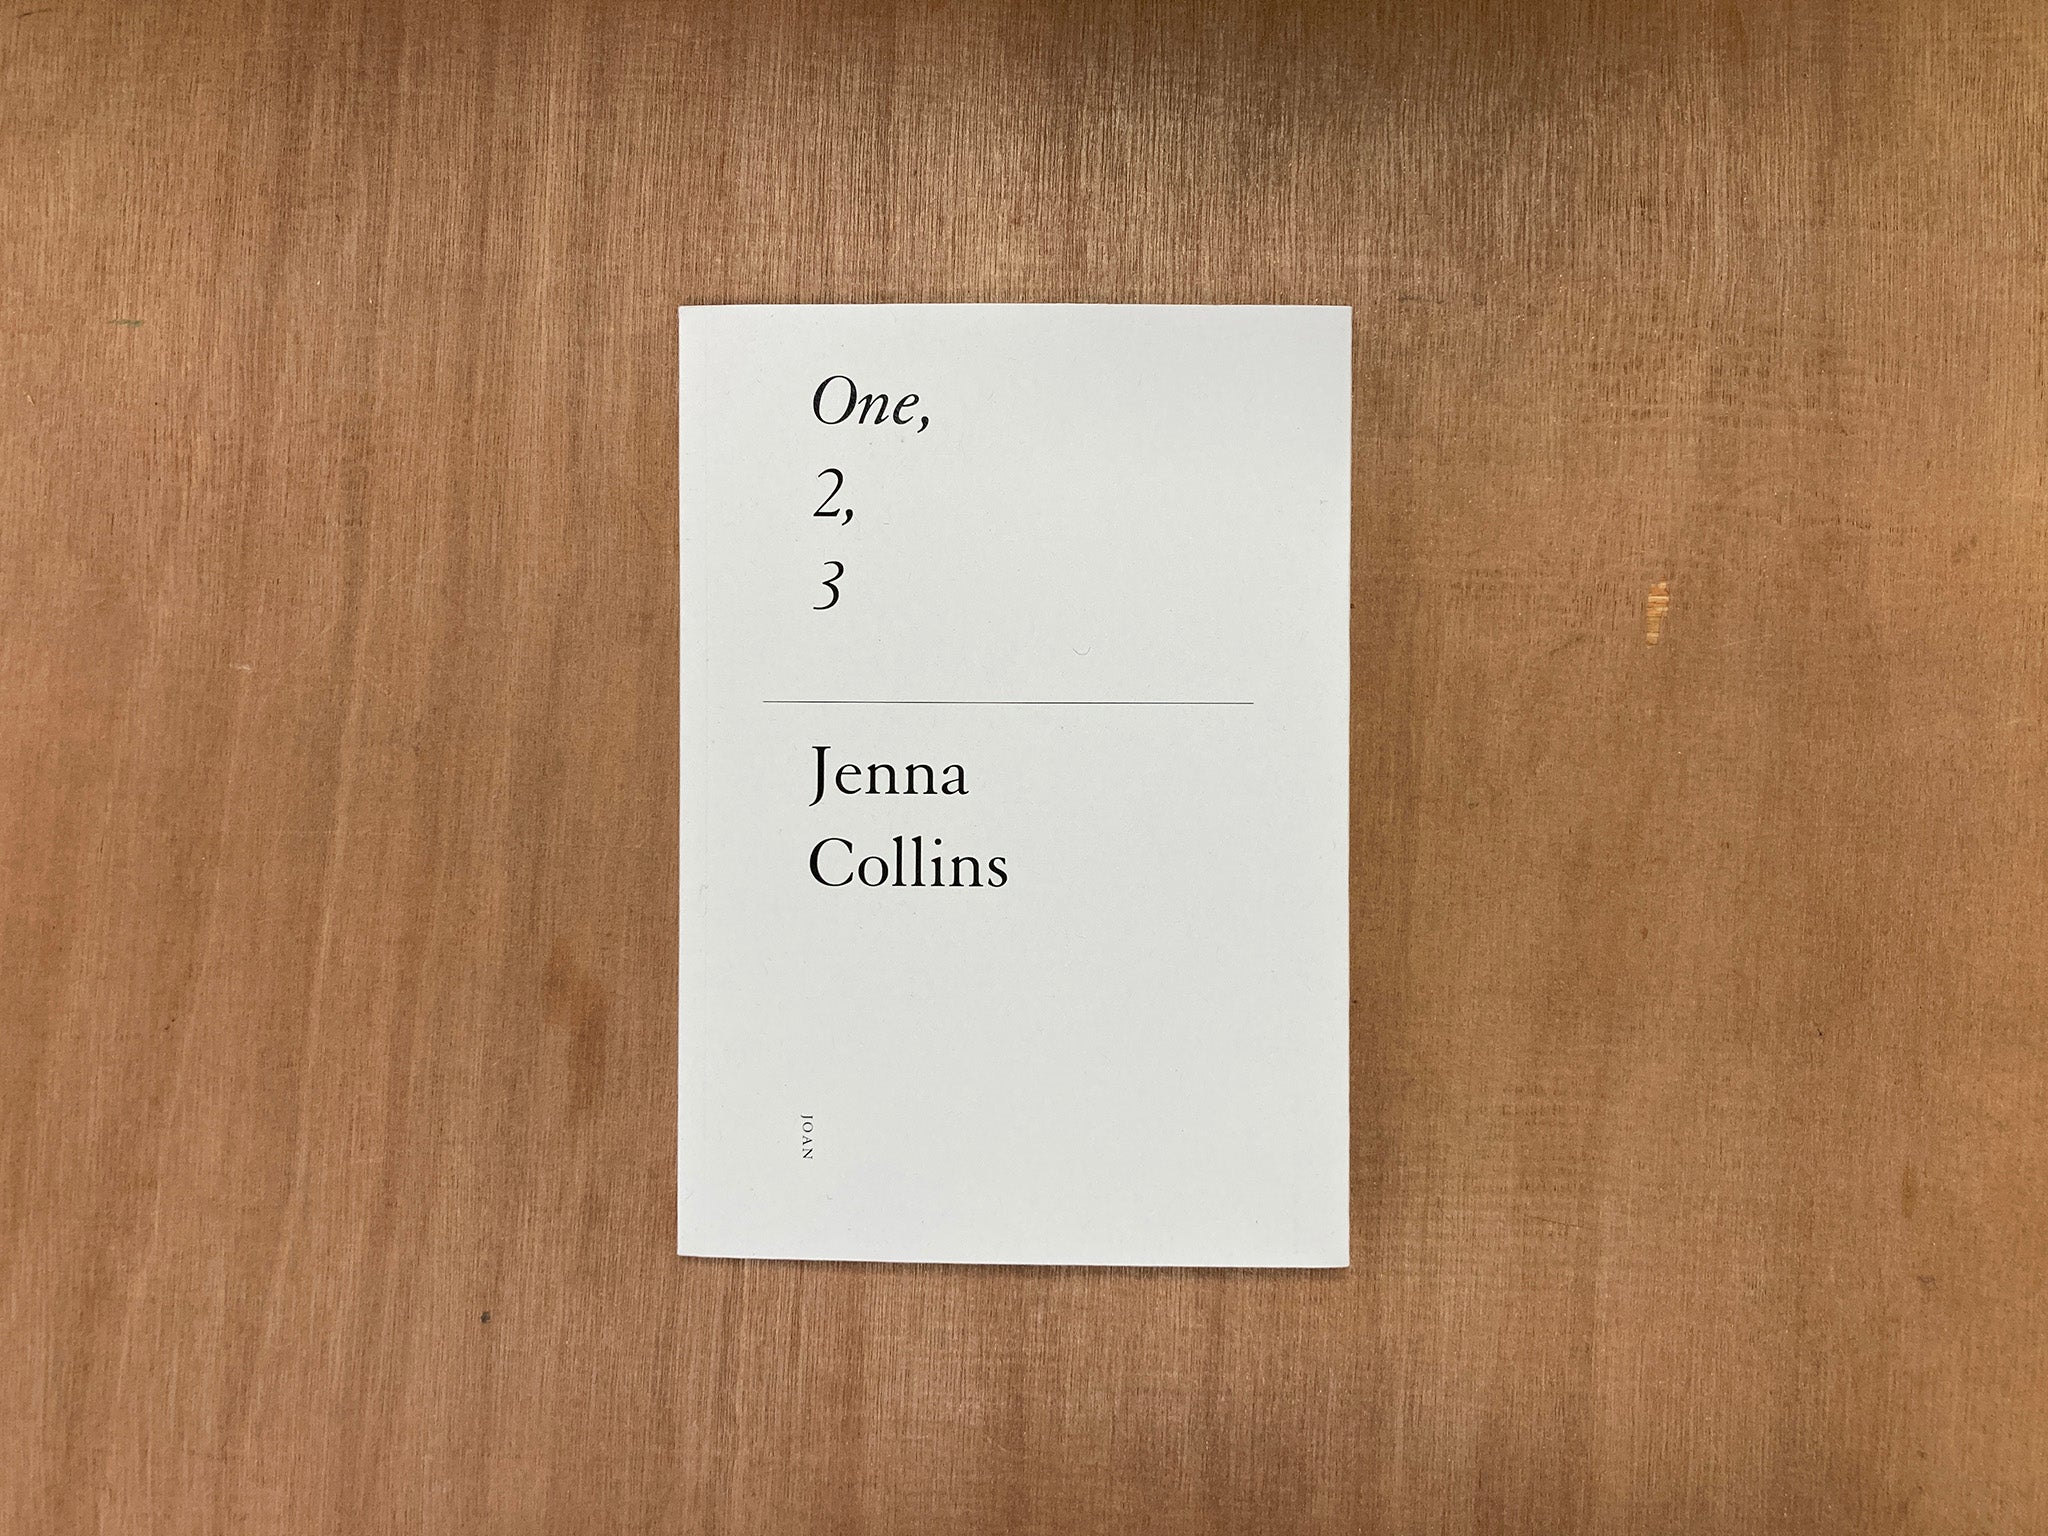 ONE, 2, 3 by Jenna Collins